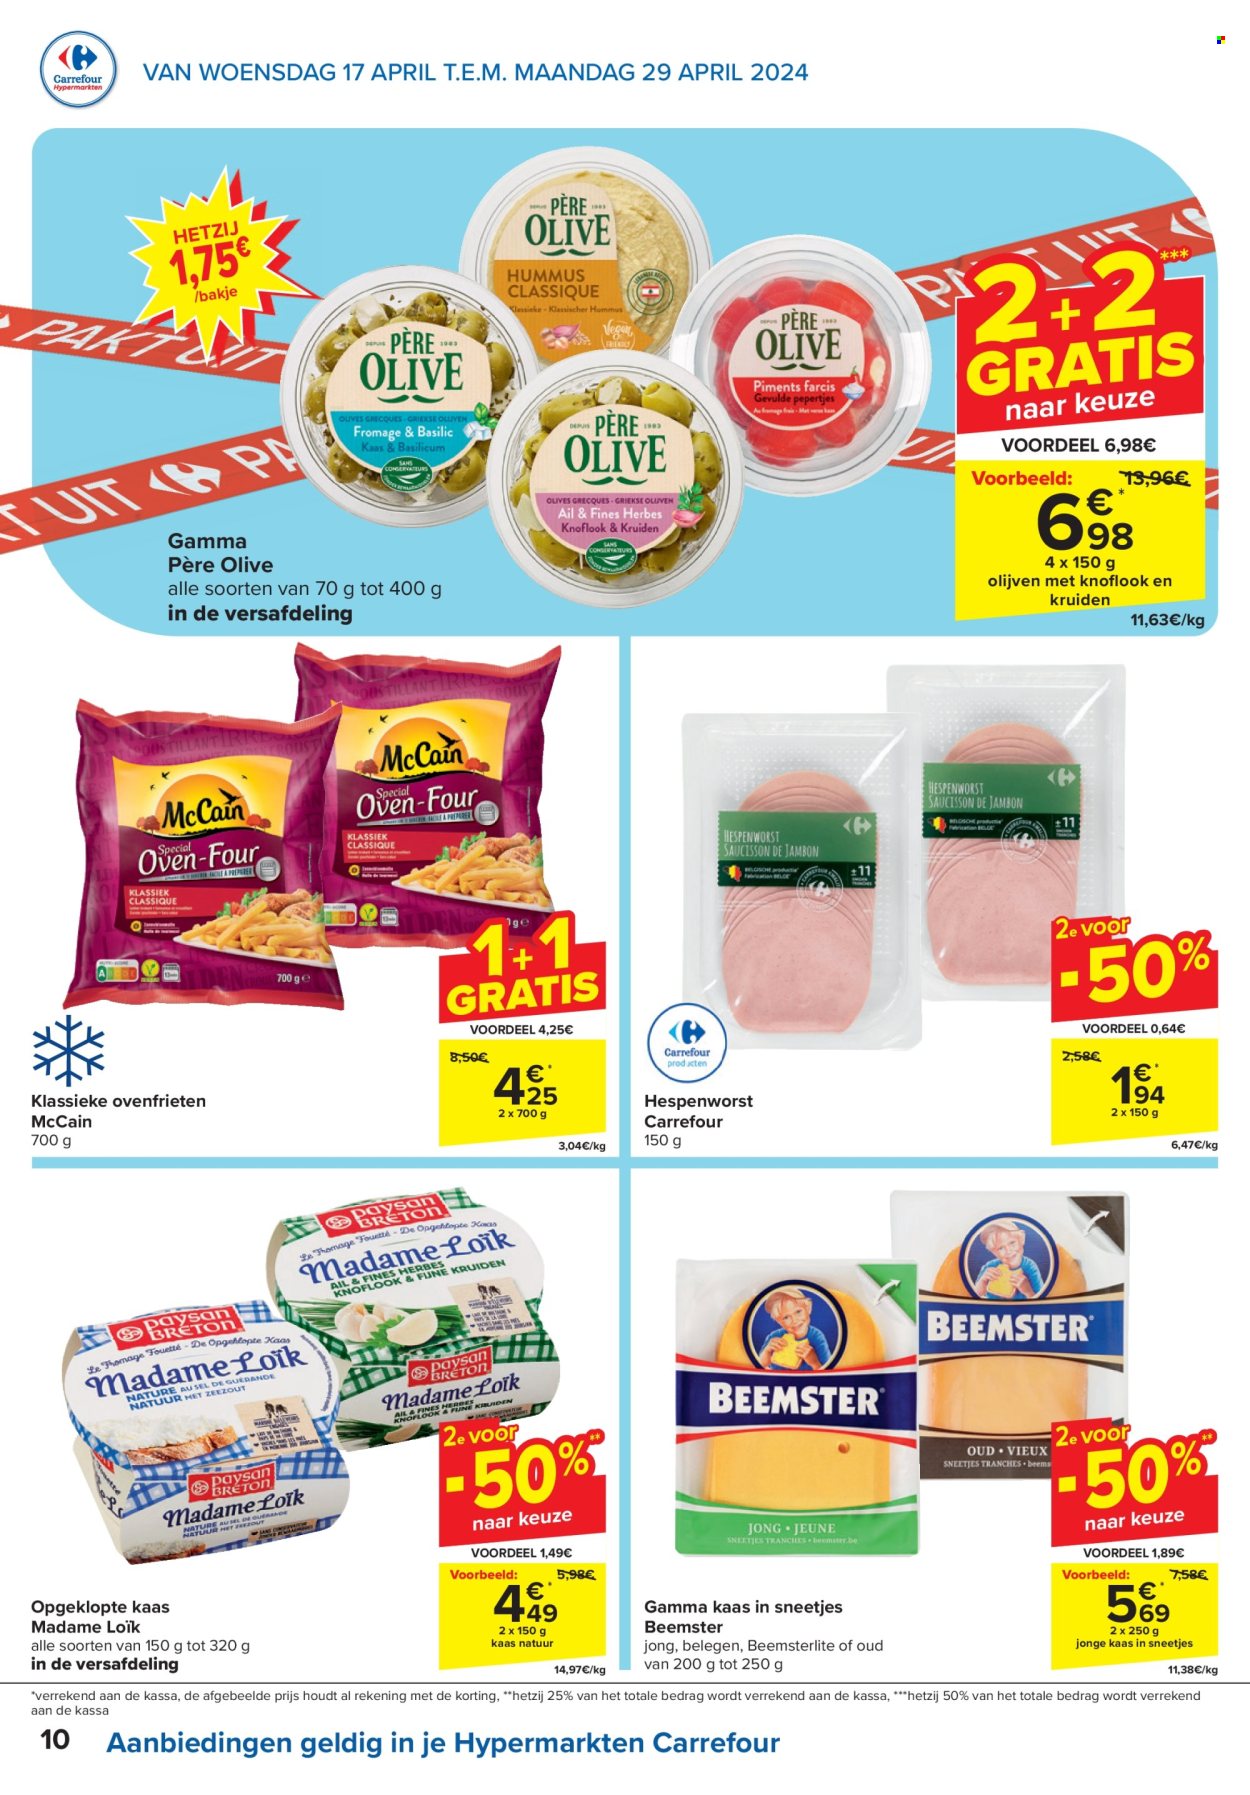 Catalogue Carrefour hypermarkt - 17.4.2024 - 29.4.2024. Page 10.